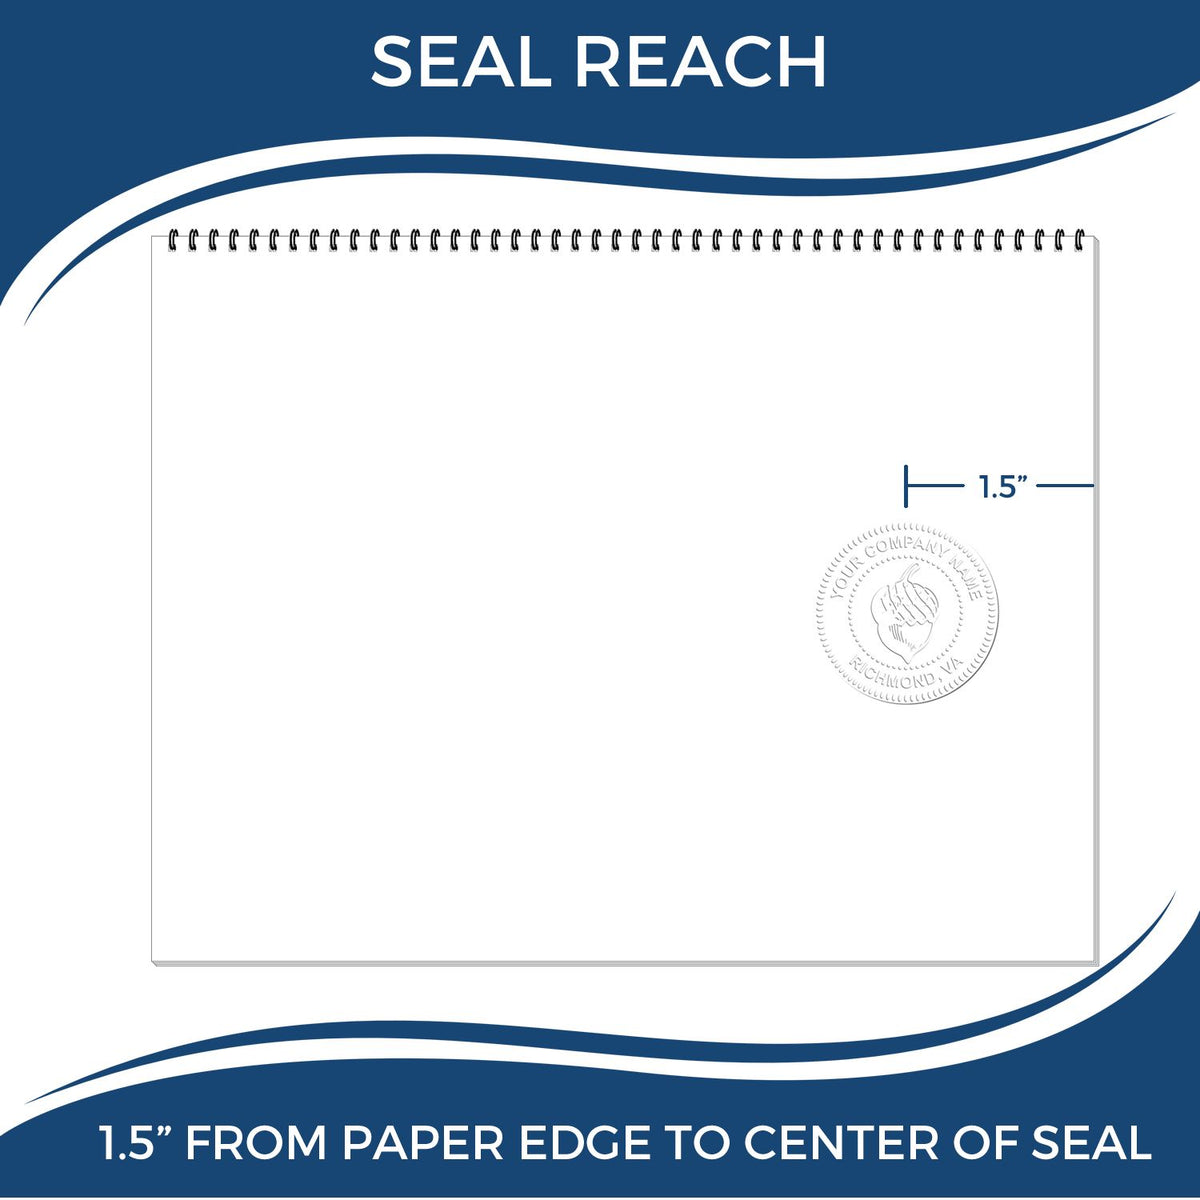 An infographic showing the seal reach which is represented by a ruler and a miniature seal image of the Hybrid Alaska Land Surveyor Seal